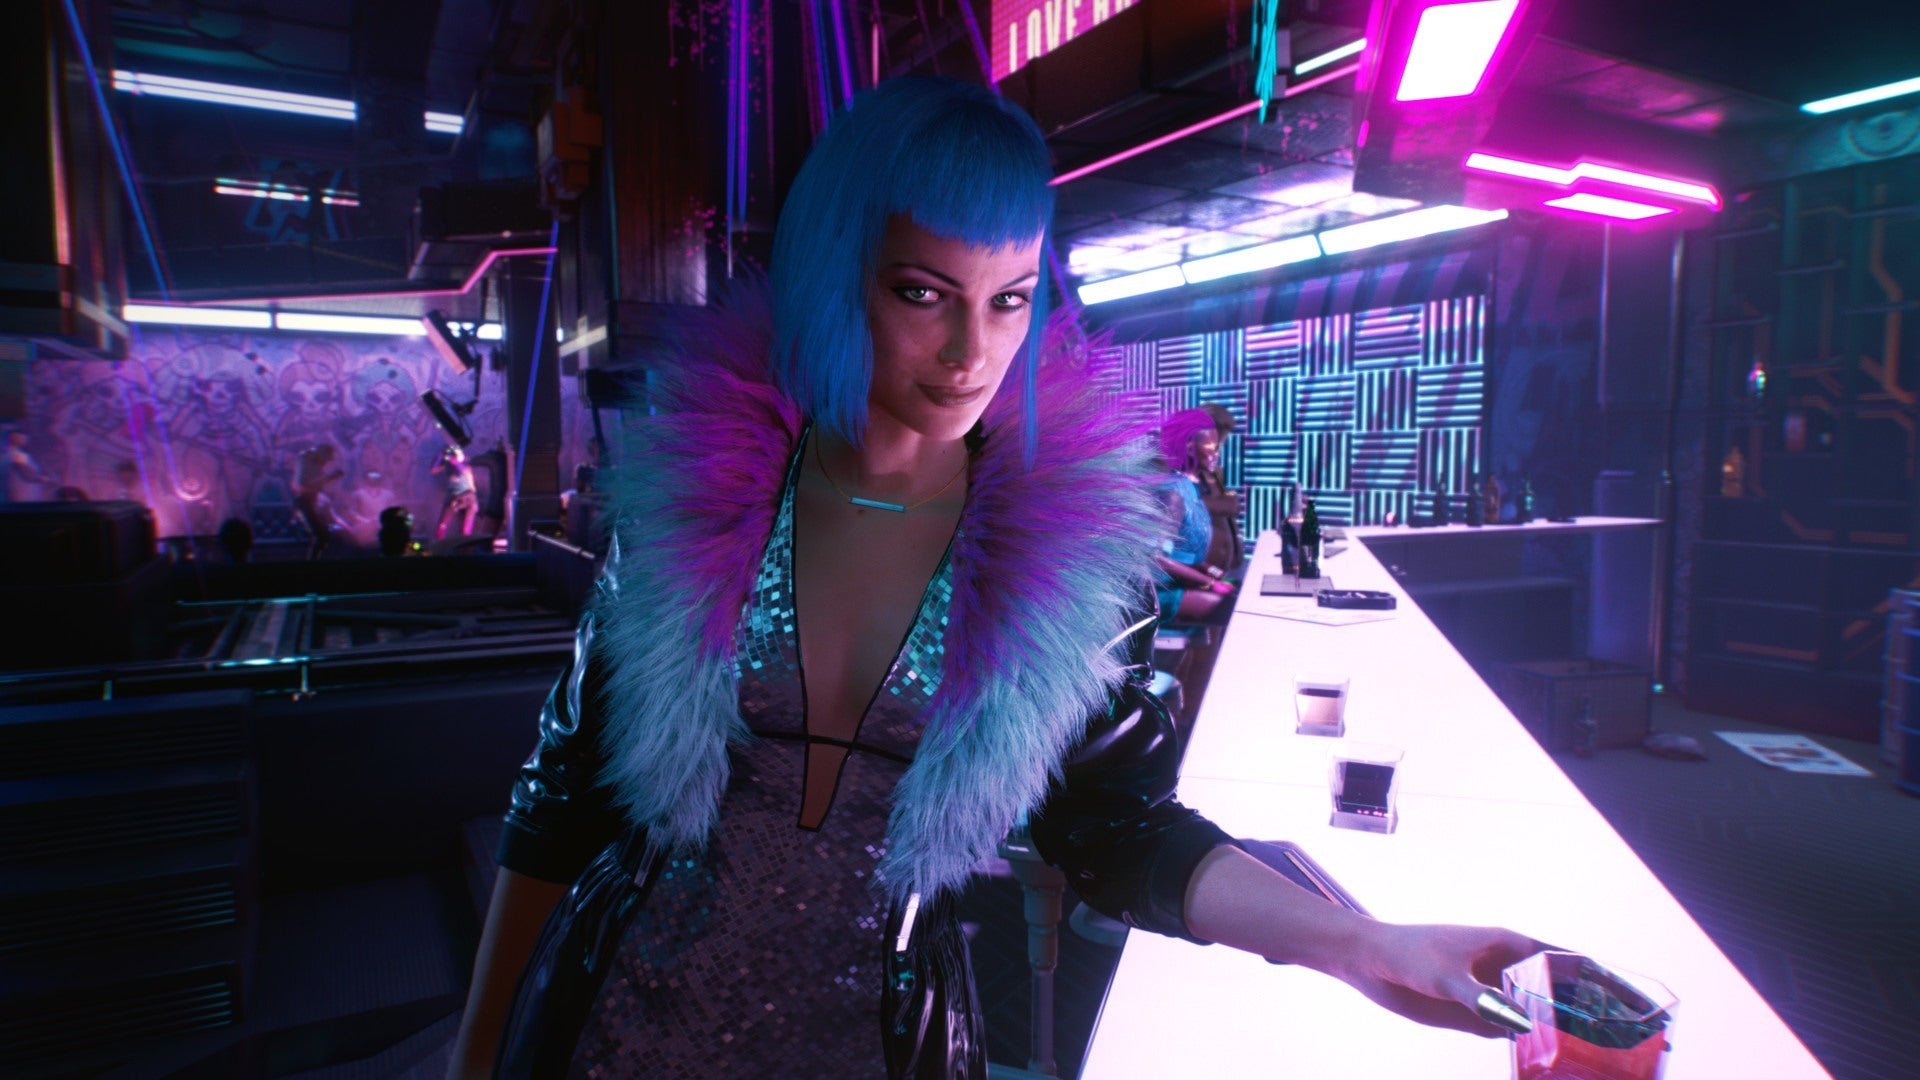 Cyberpunk 2077 developers reportedly faced CDPR leadership with crisis and launch issues

